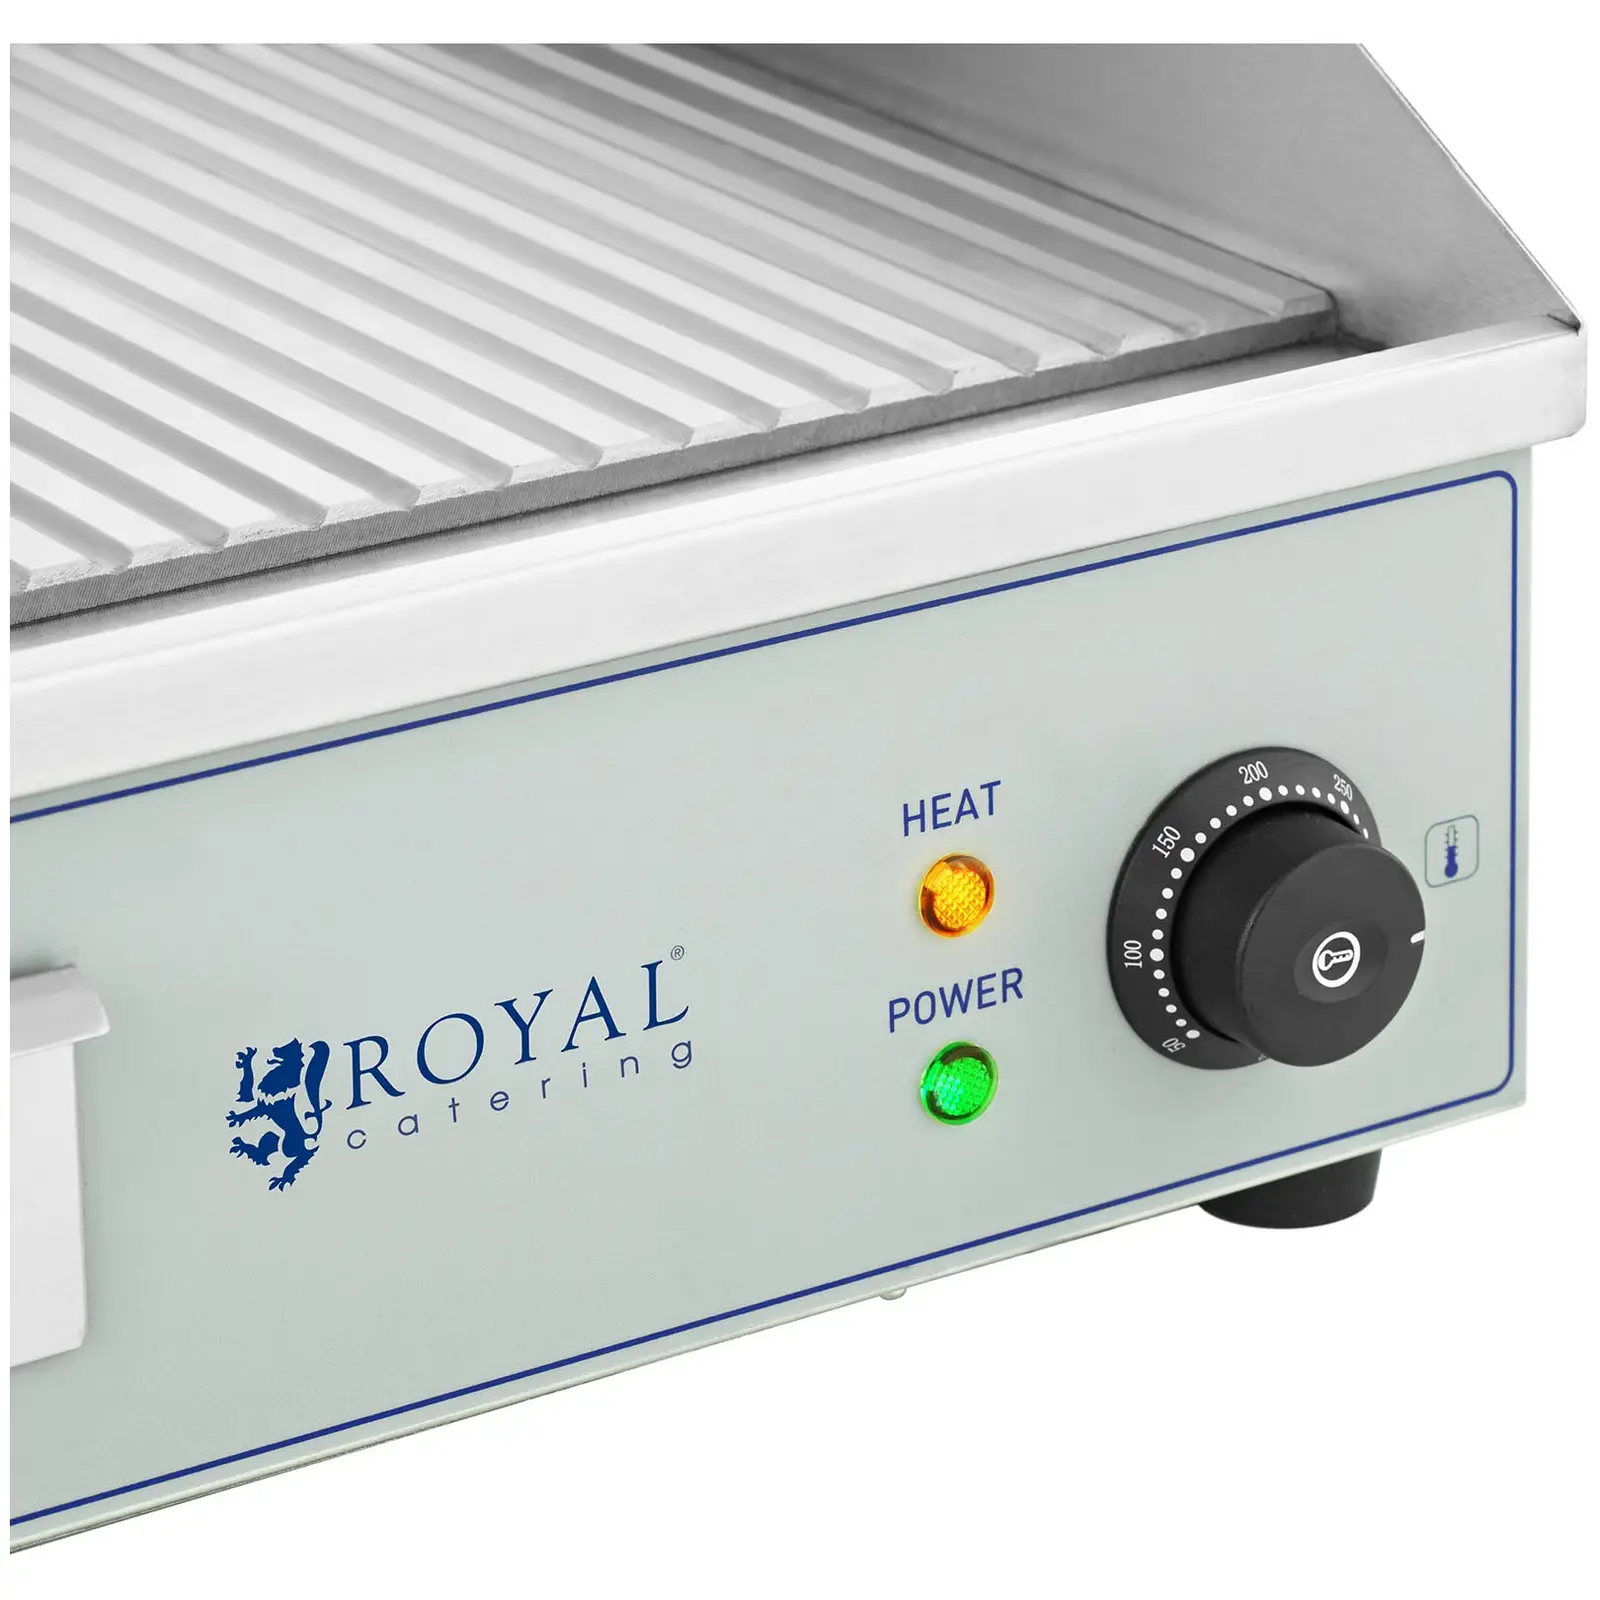 Plancha eléctrica fry-top doble - 400 x 730 mm - Royal Catering - 2 x 2,200 W